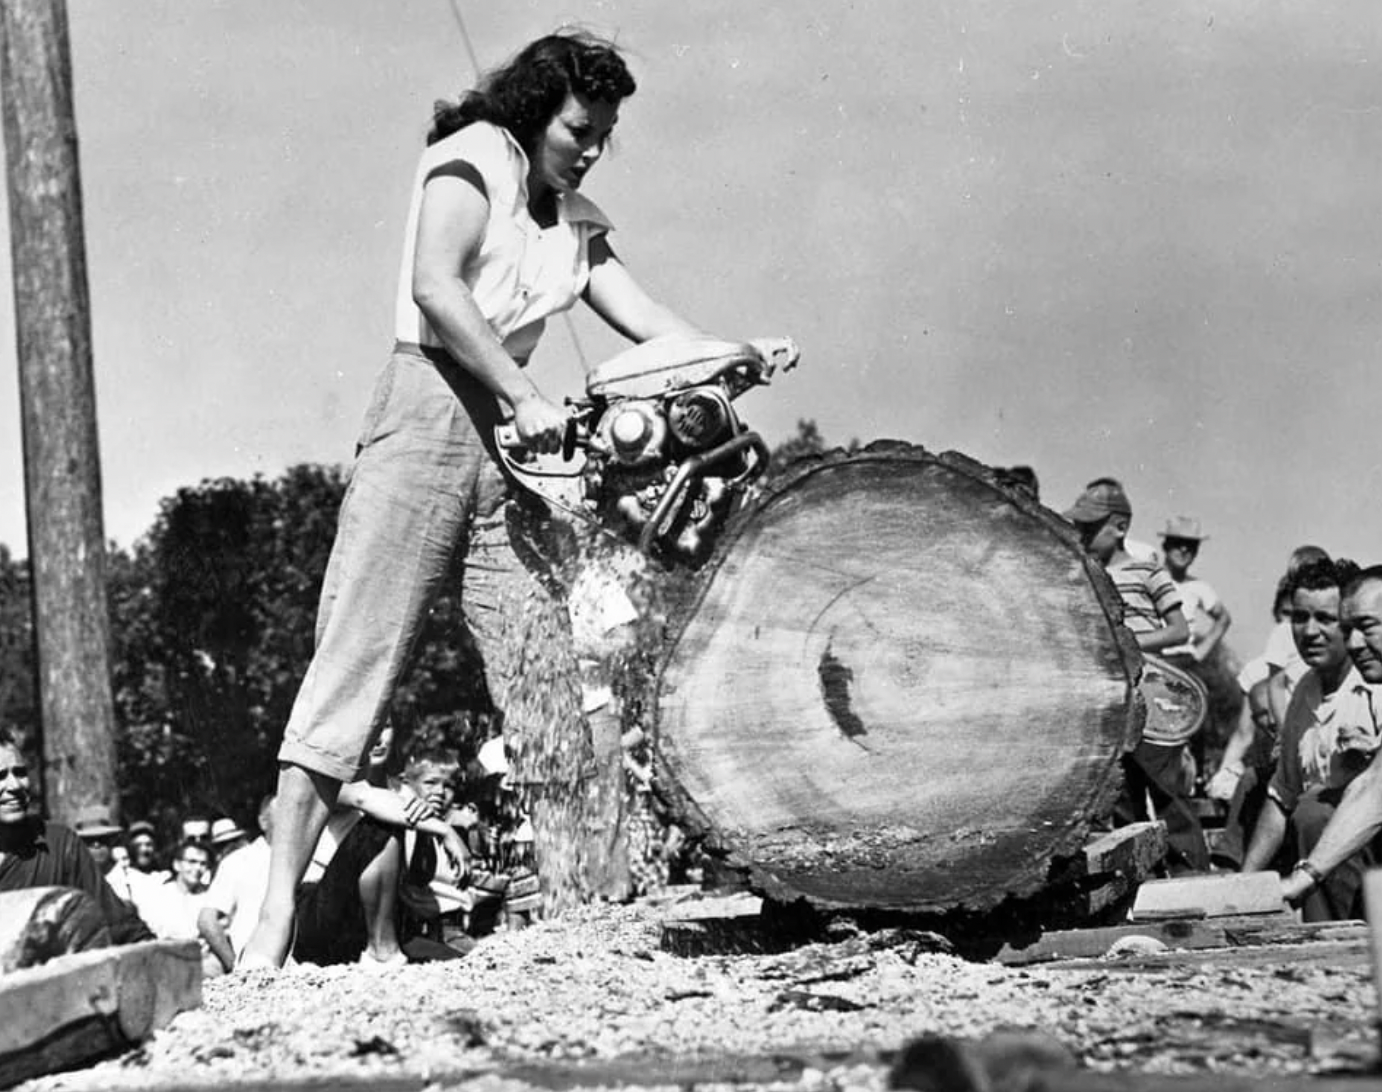 Lumberjill Jeri Smith won first place at the Timber Days Festival in Sutherlin, Oregon, 1953.